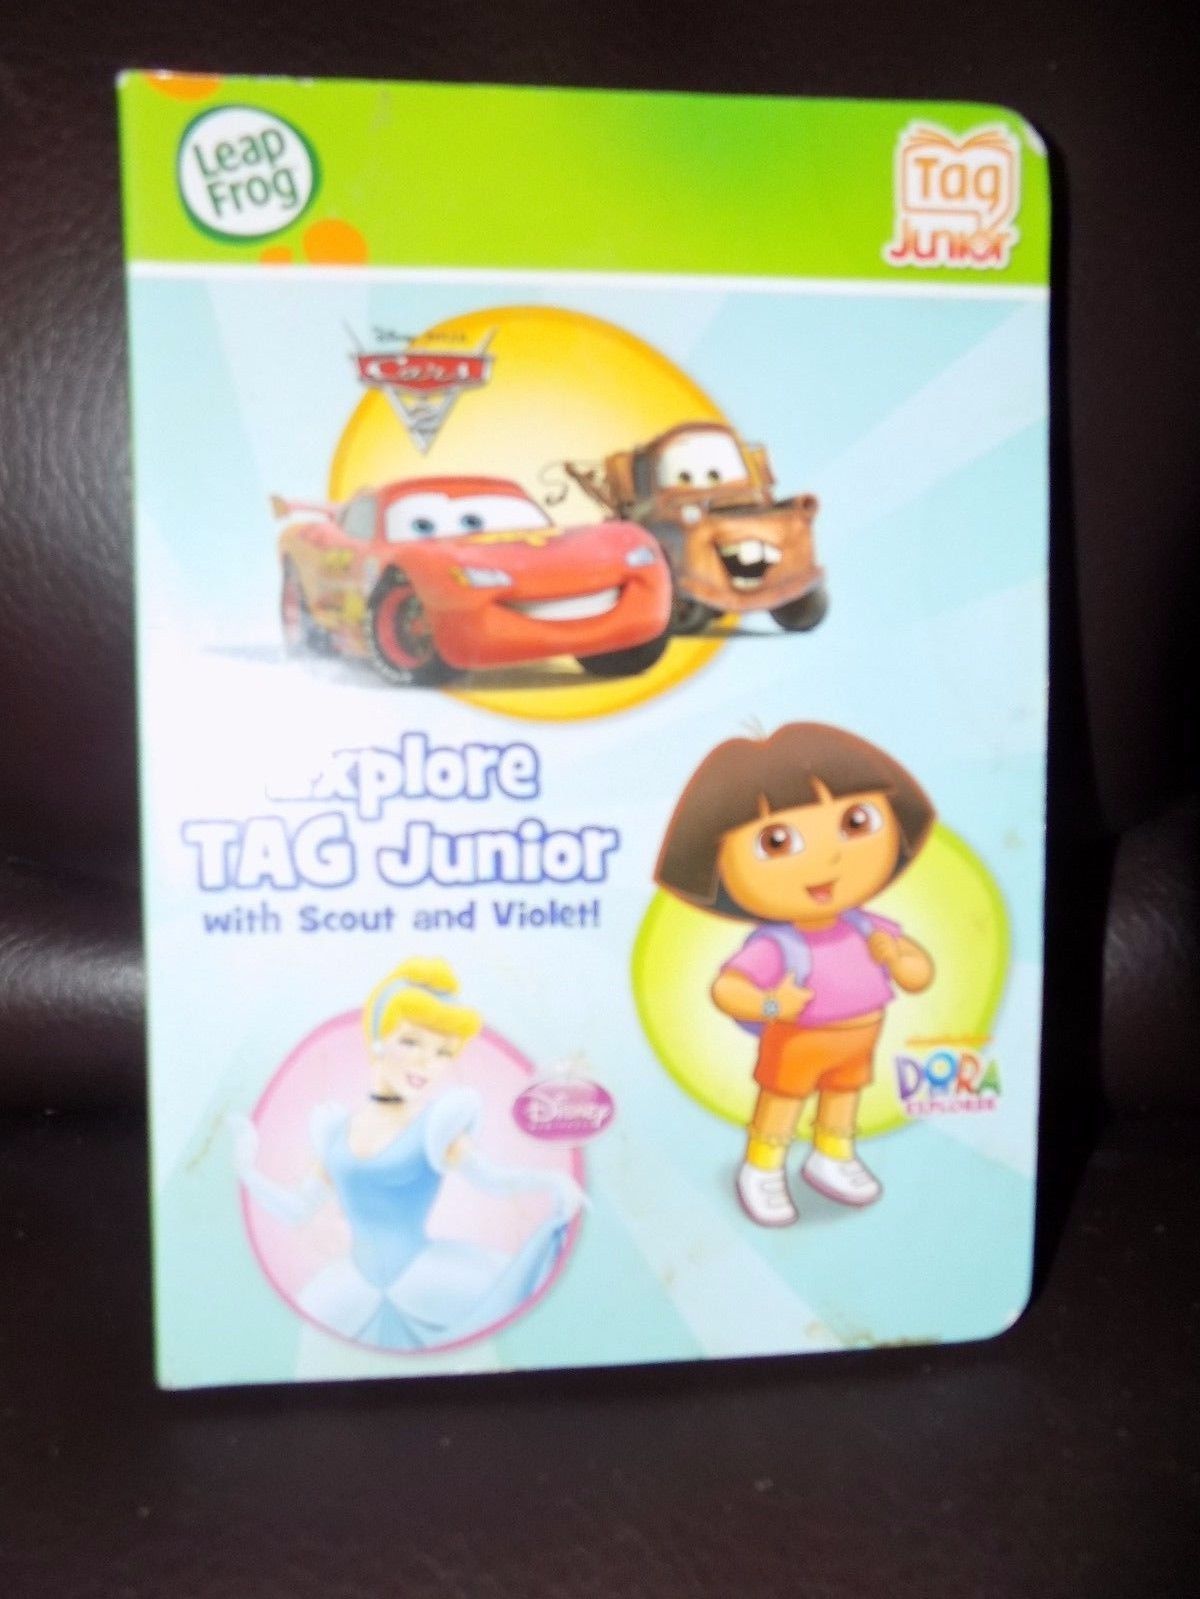 LeapFrog Tag Pen Leap Junior Book — EXPLORE TAG JUNIOR WITH SCOUT AND VIOLET 